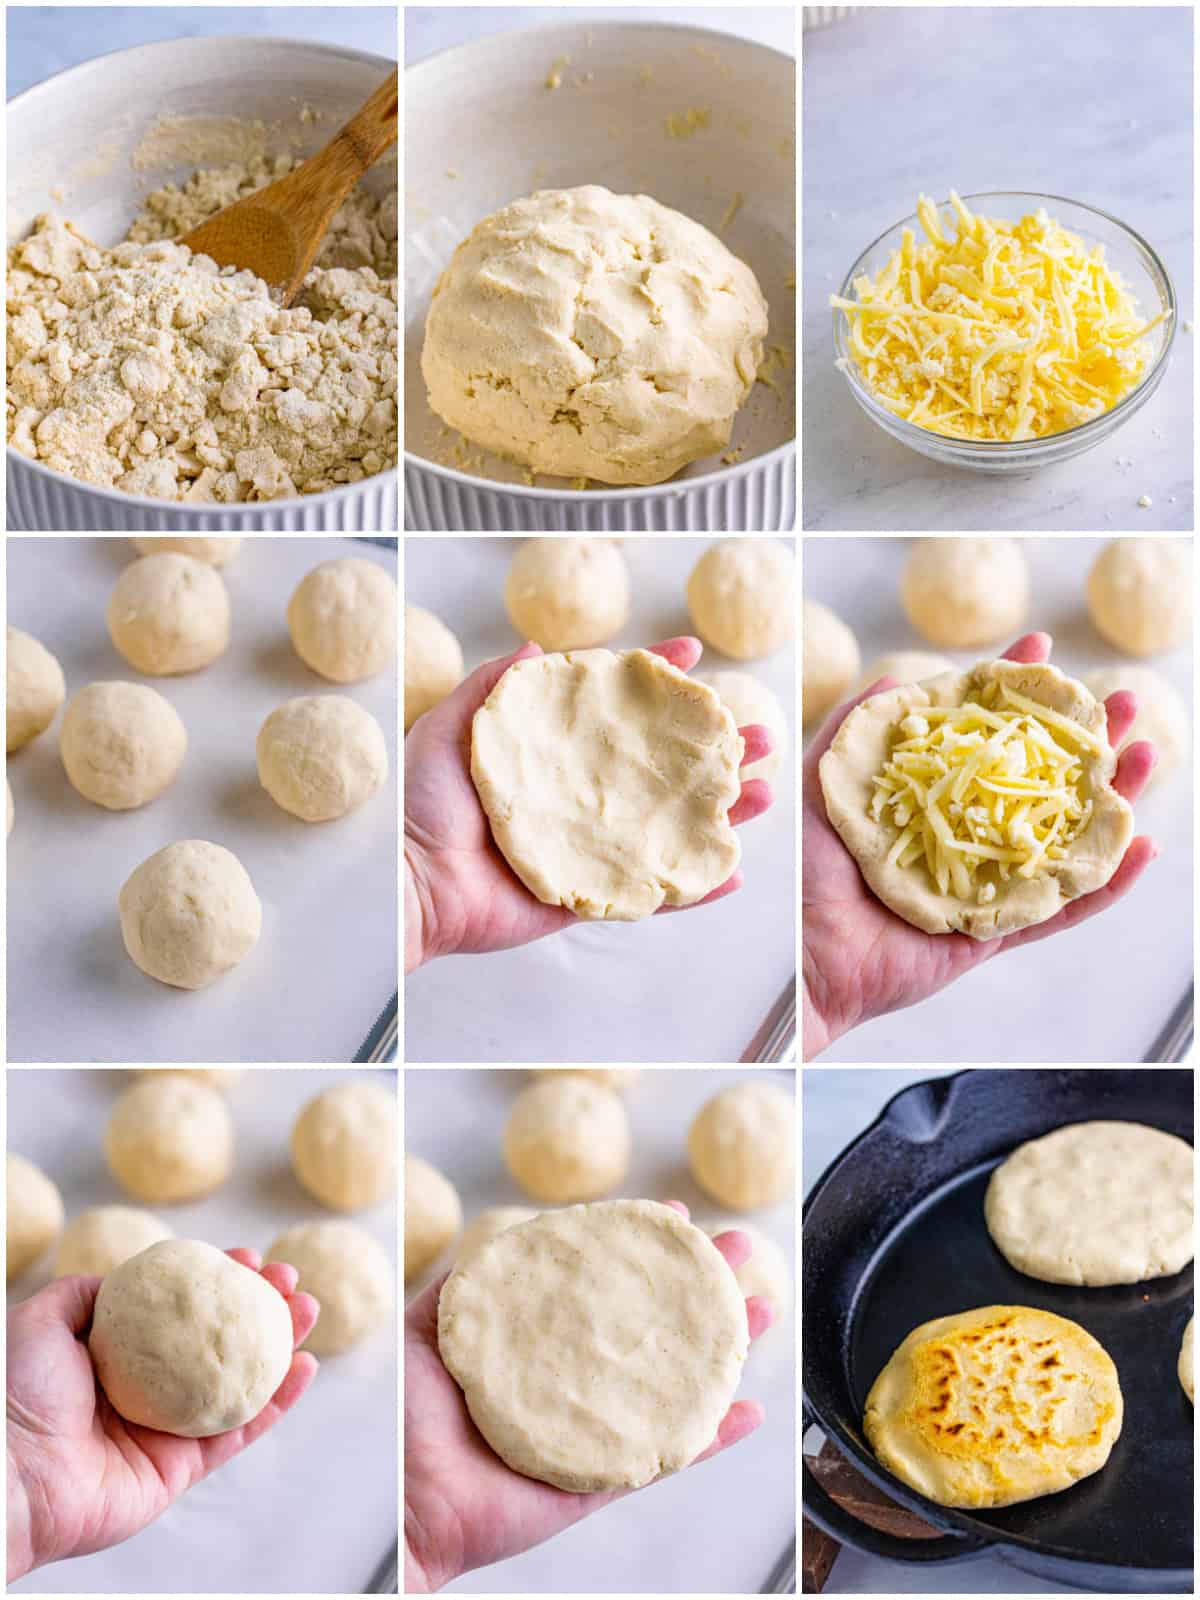 Step by step on how to make a Pupusas Recipe.